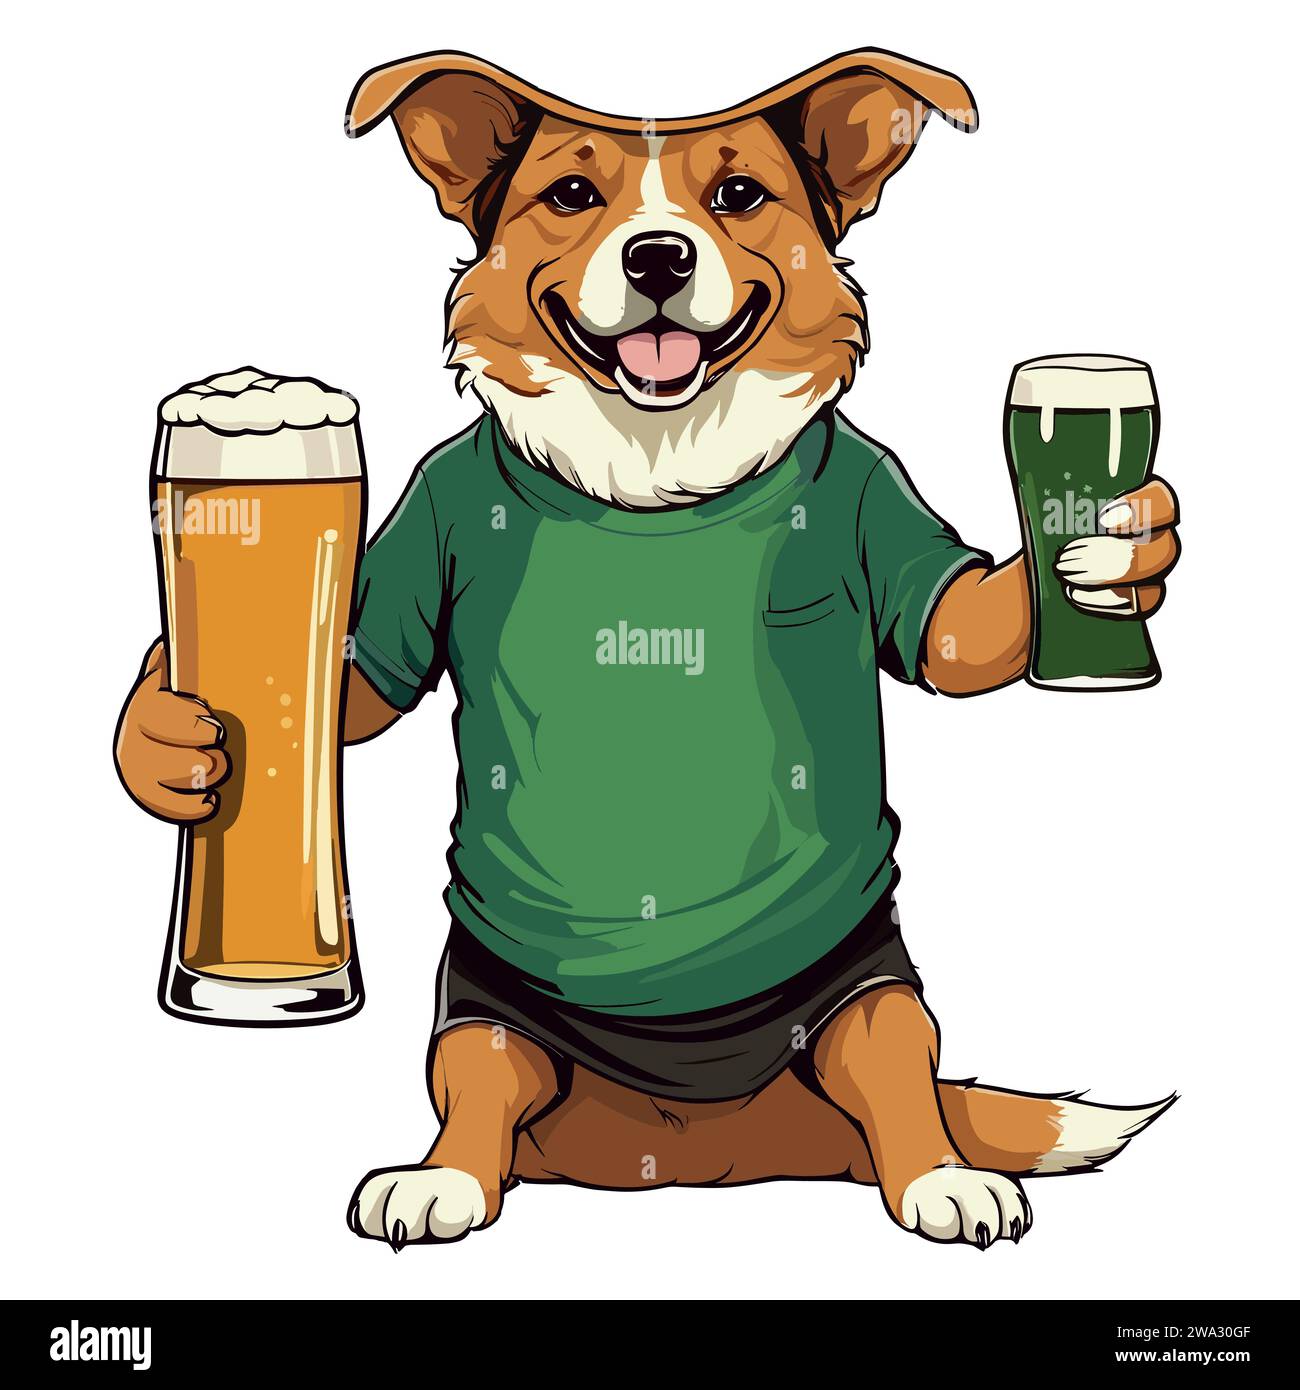 Dog with a beer glass in hand, celebrating by drinking beer. Dog wear shirt vector illustration Stock Vector